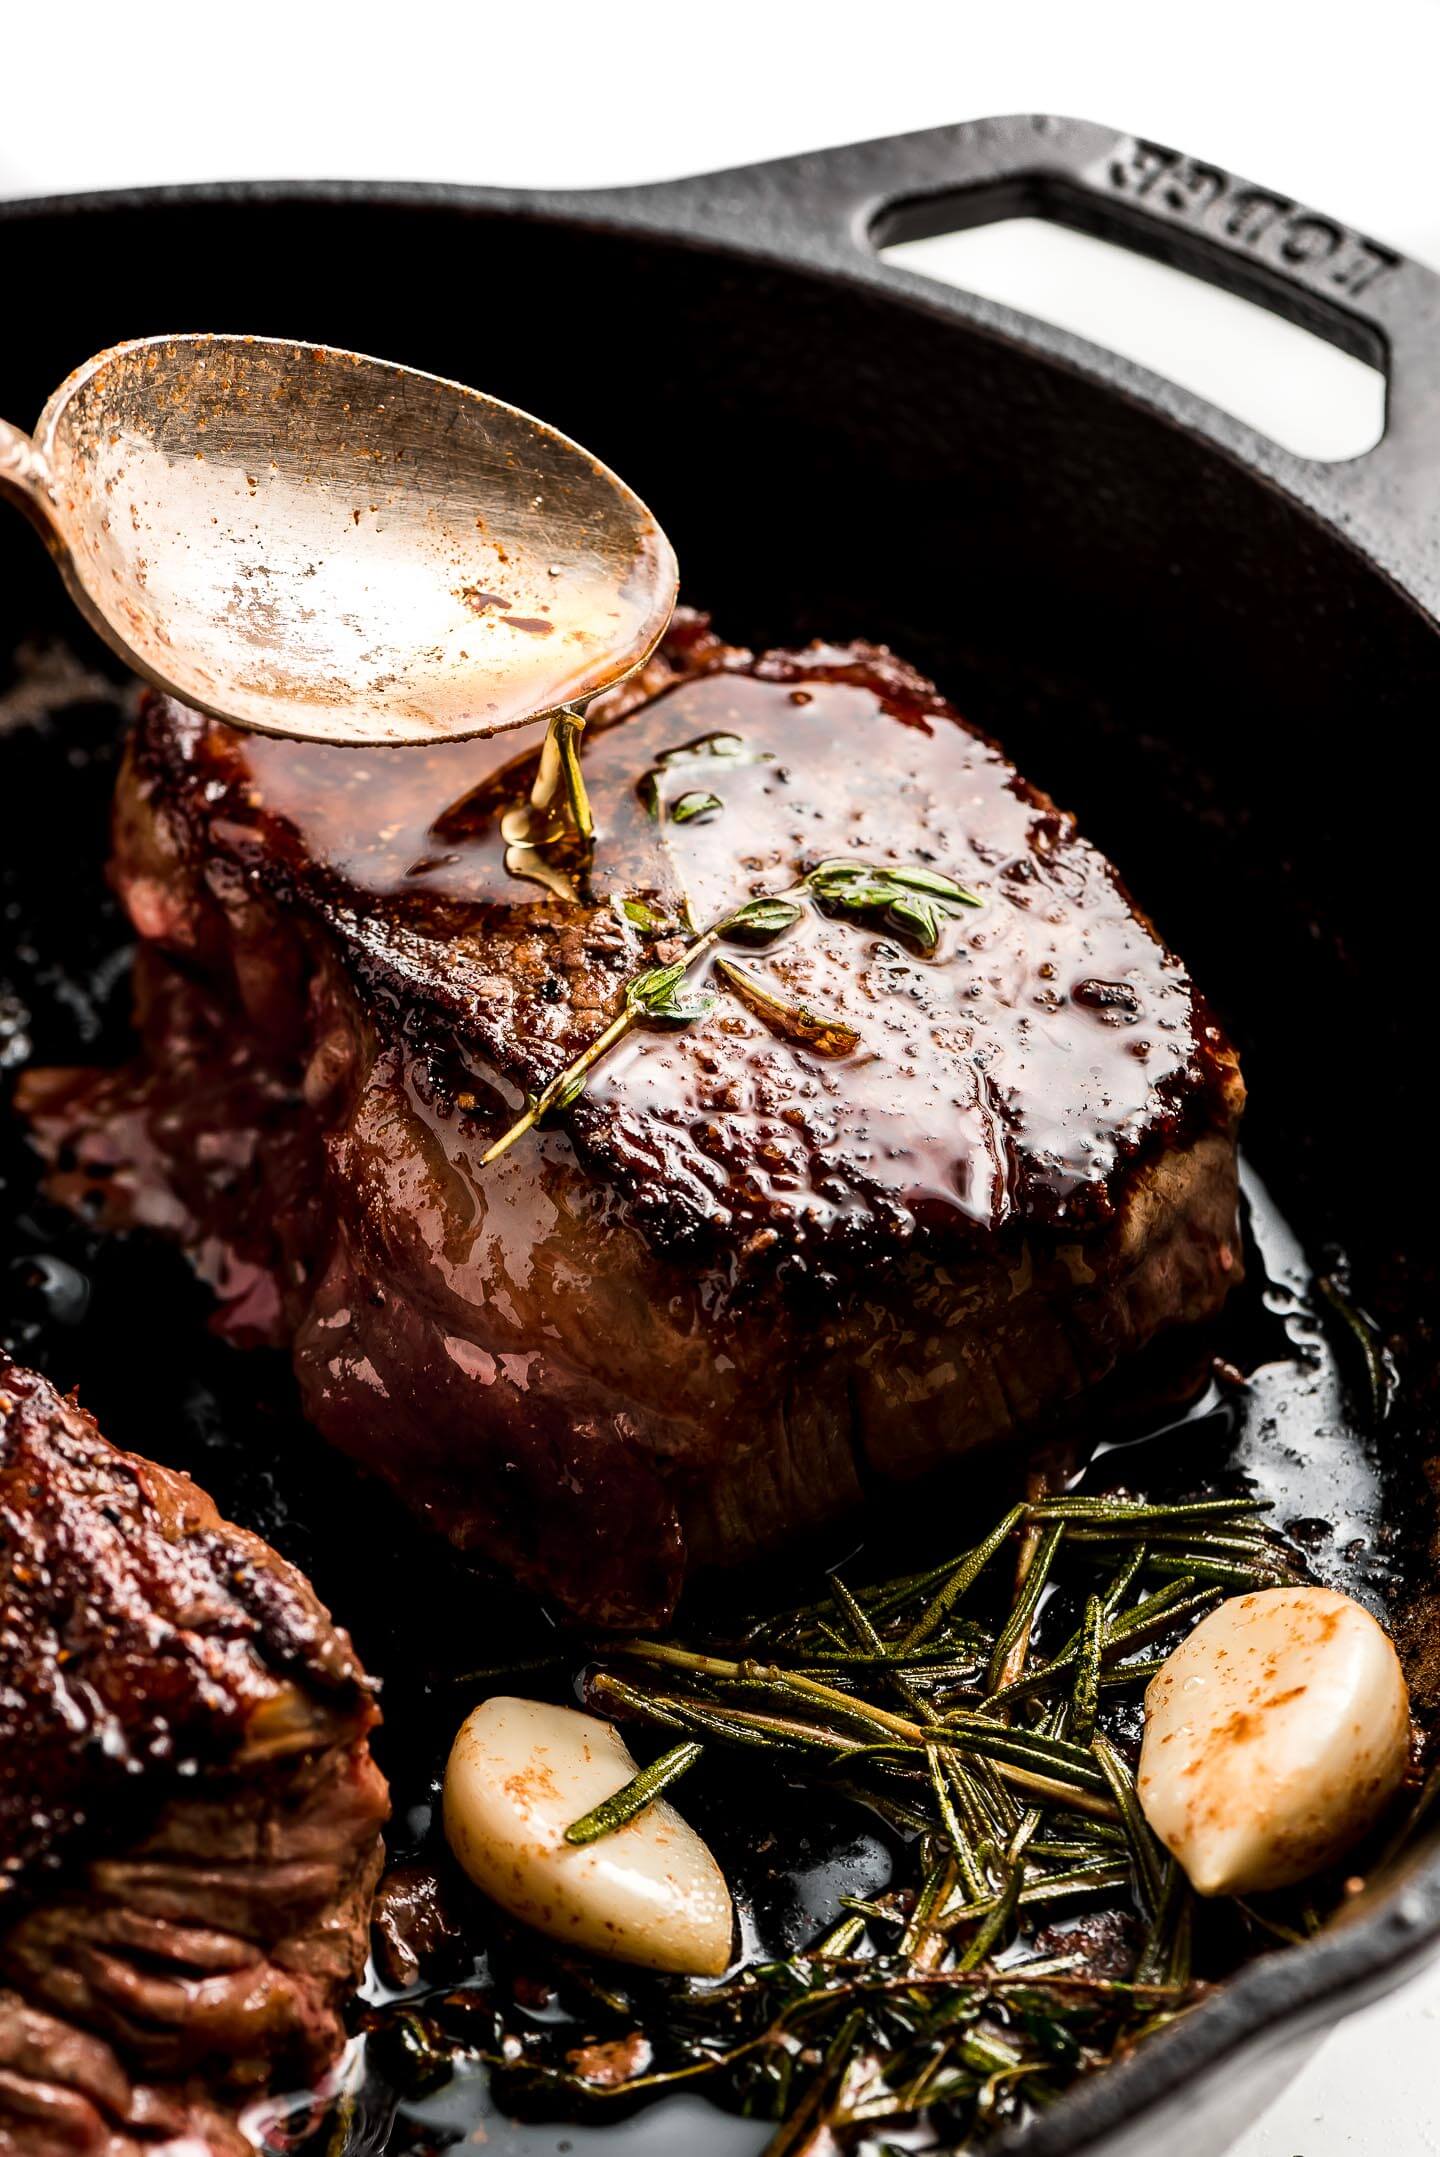 Spooning melted butter over a filet mignon in a cast iron skillet.